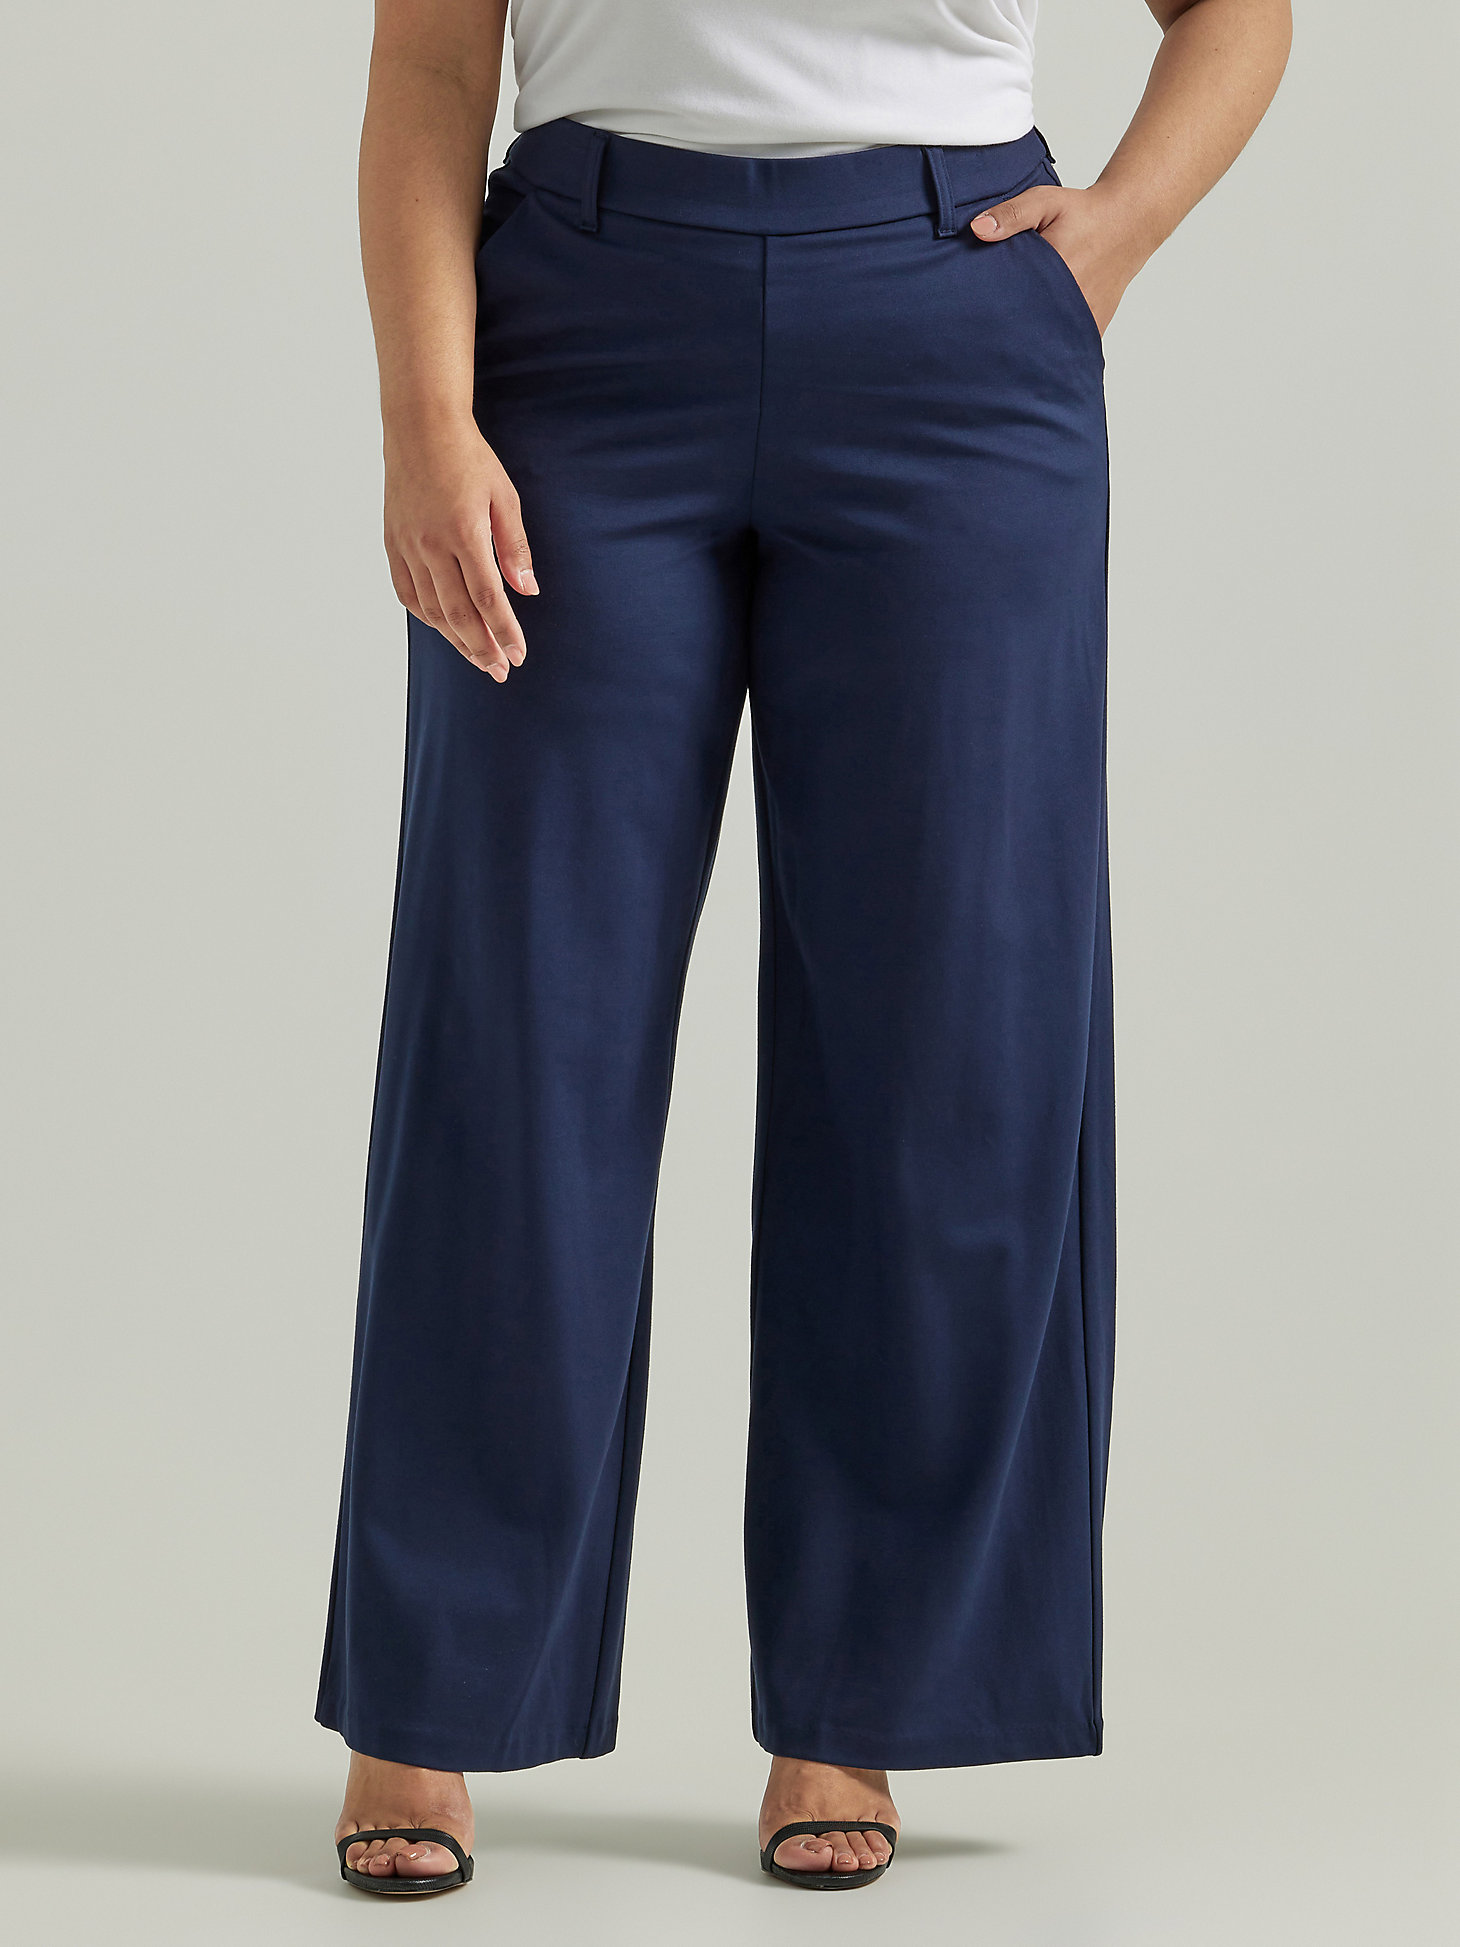 Women's Ultra Lux Comfort Any Wear Wide Leg Pant (Plus) in Emperor Navy main view